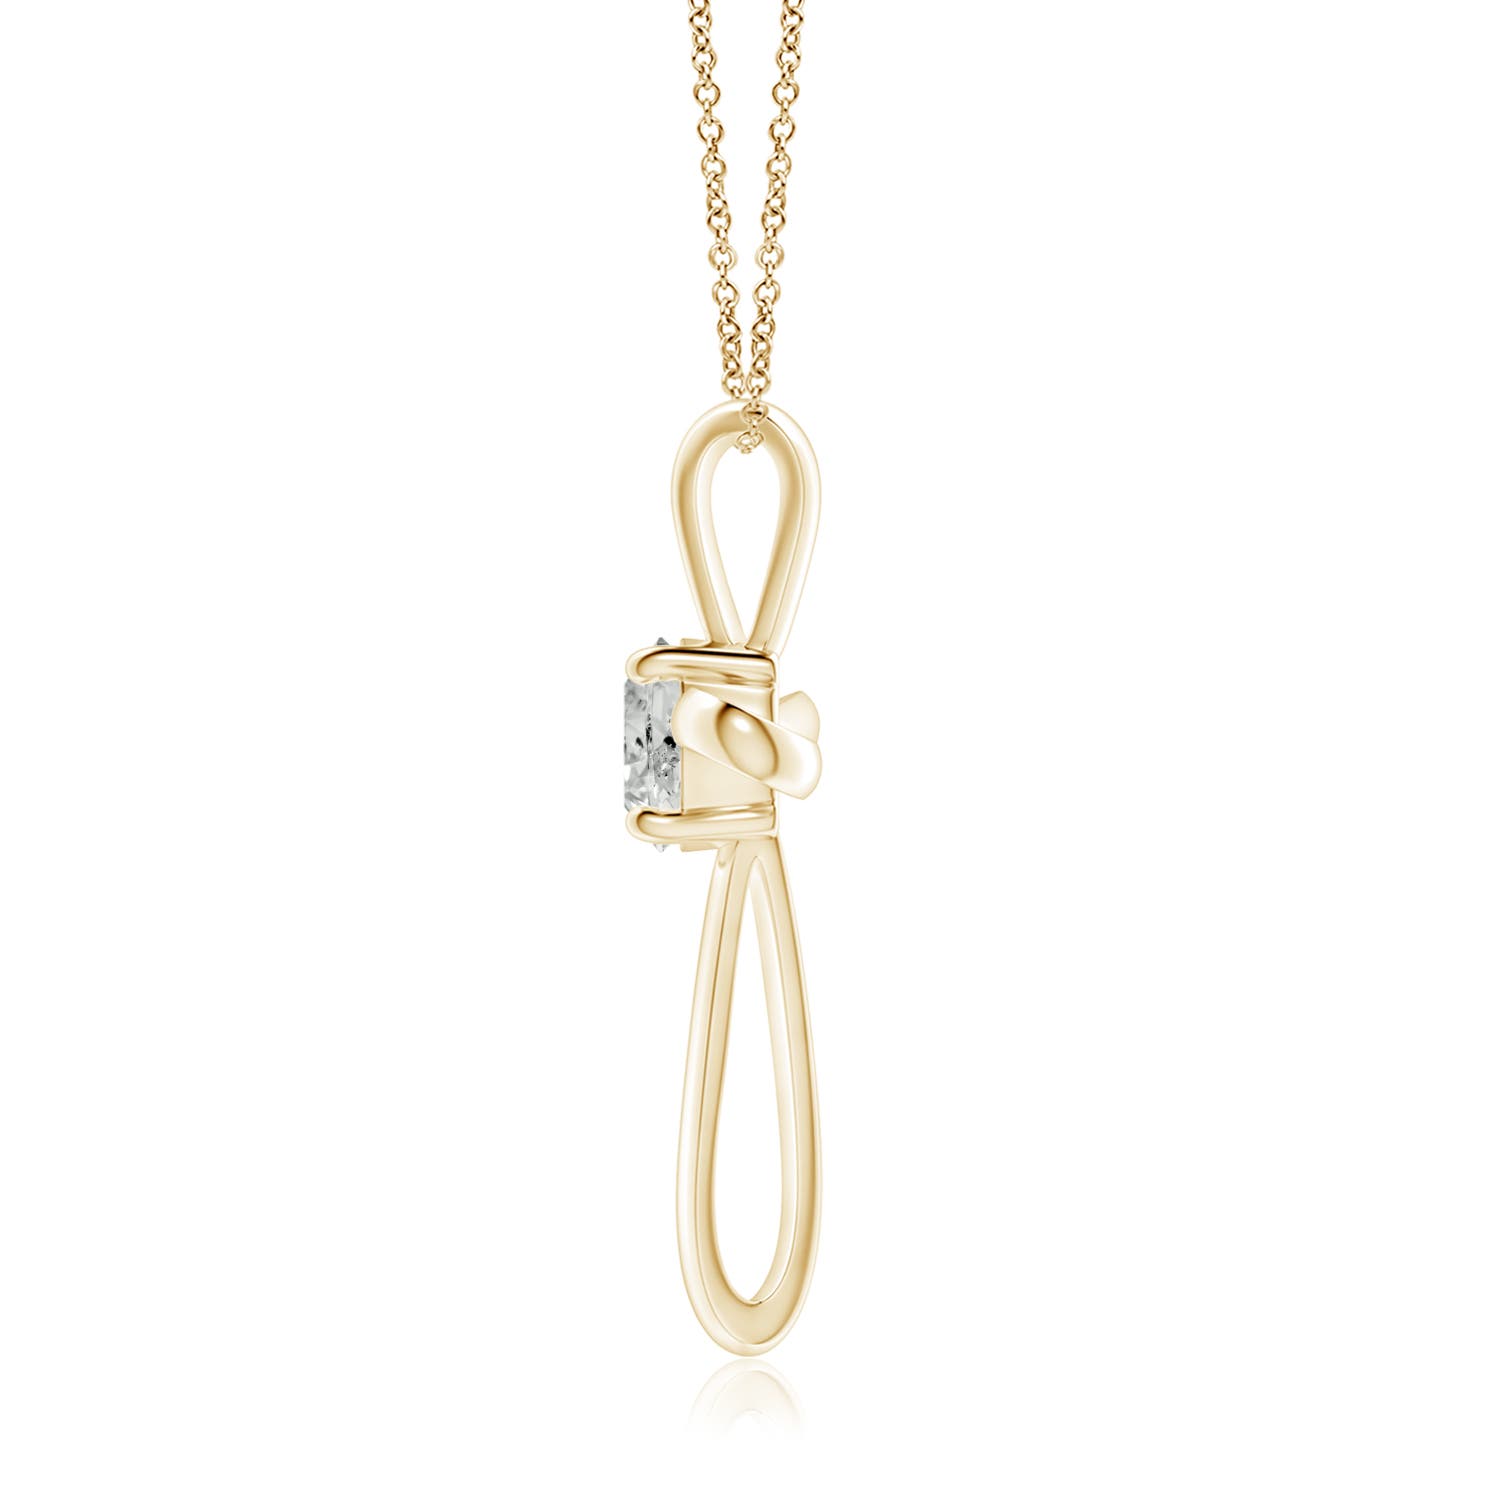 K, I3 / 1 CT / 18 KT Yellow Gold